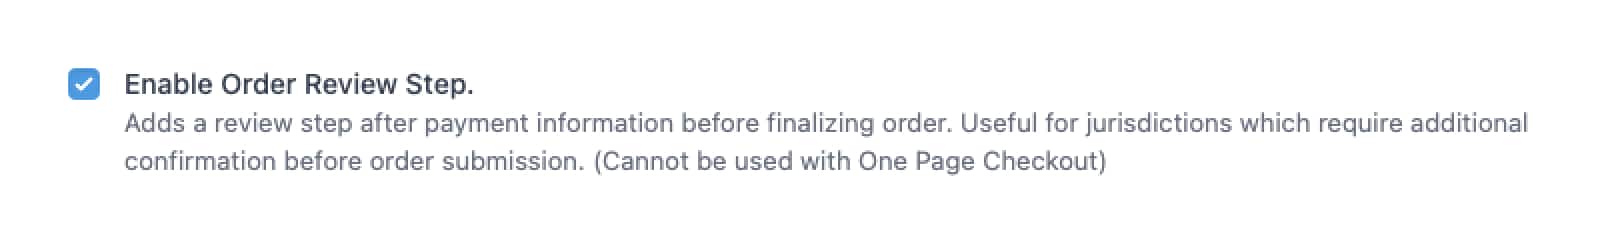 Enable Order Review Setting